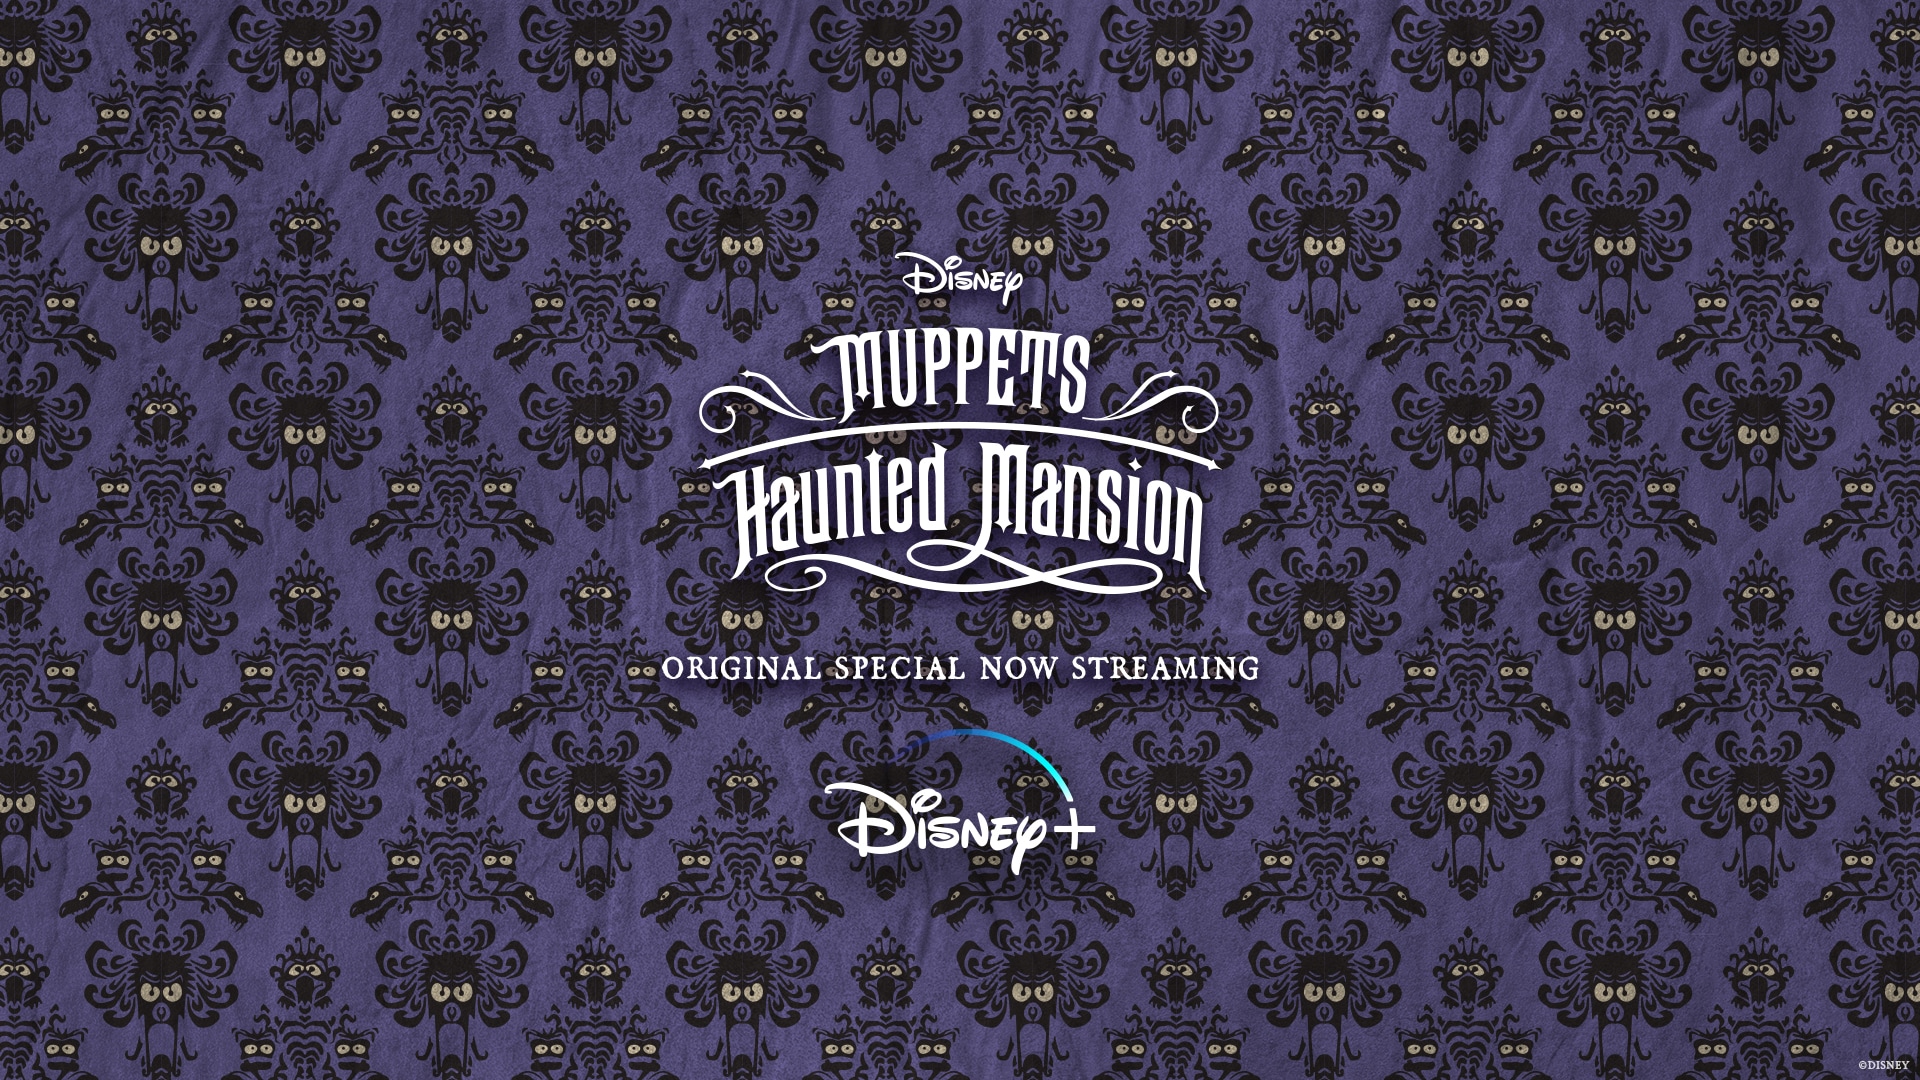 Celebrate 'Muppets Haunted Mansion' With All New Digital Wallpaper, Stickers, And More!. Disney Parks Blog